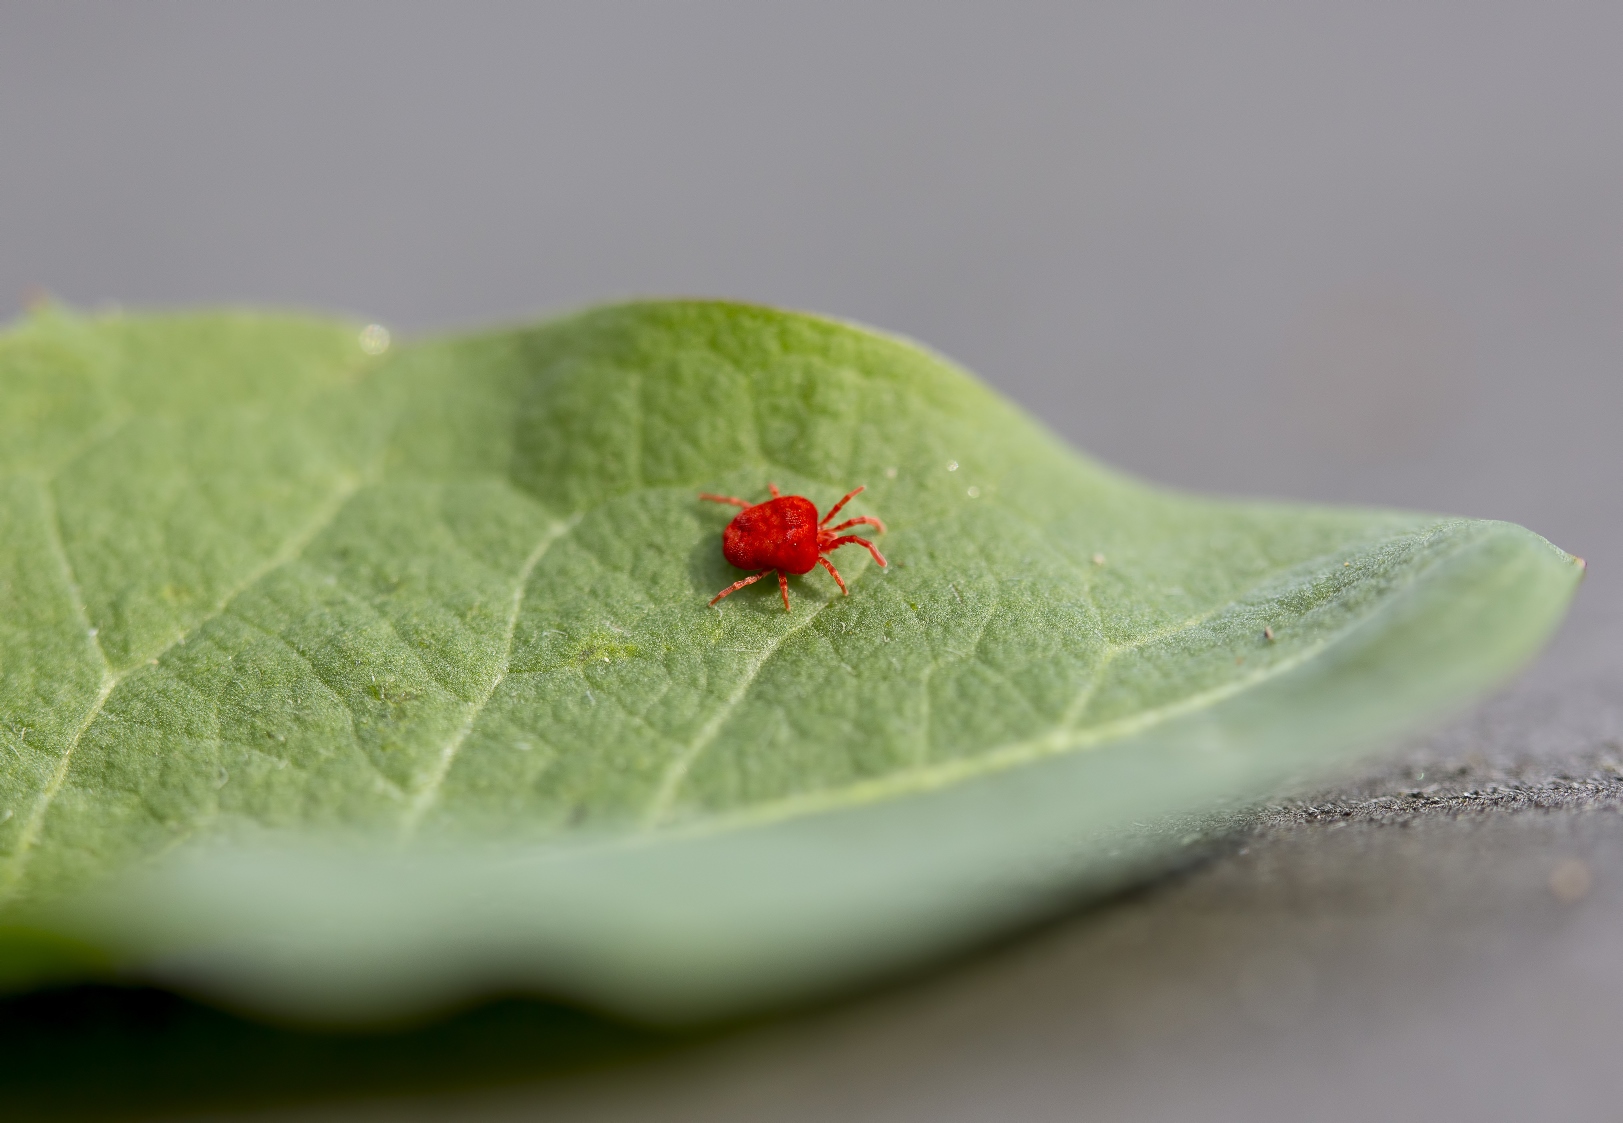 Red spider mites harm crops by sucking nutrients from their leaves. BioBee’s BioPersimilis is a natural predator of the spider mite and is harmless to plants. Image via Shutterstock.com